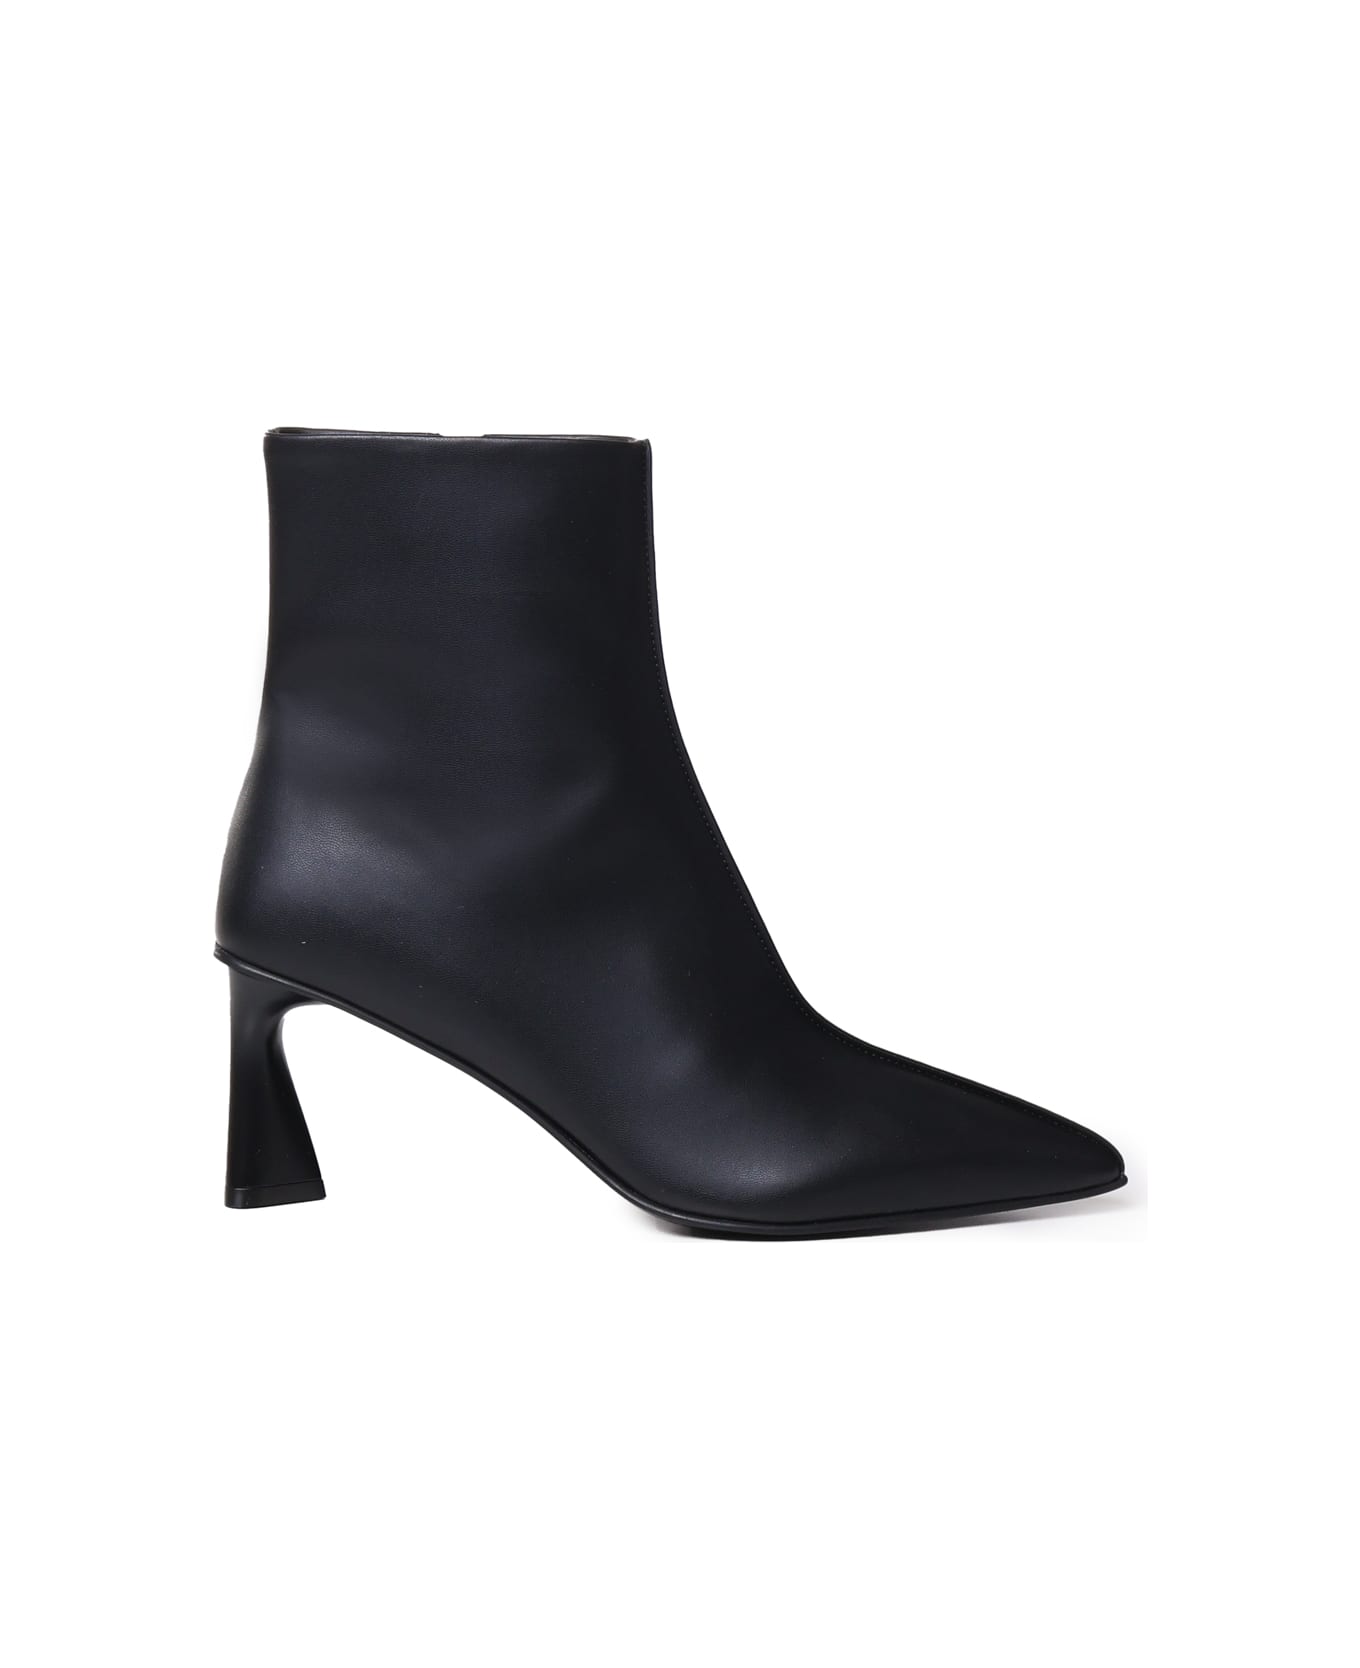 Stella McCartney Ankle Boots In Alter Mat - Black